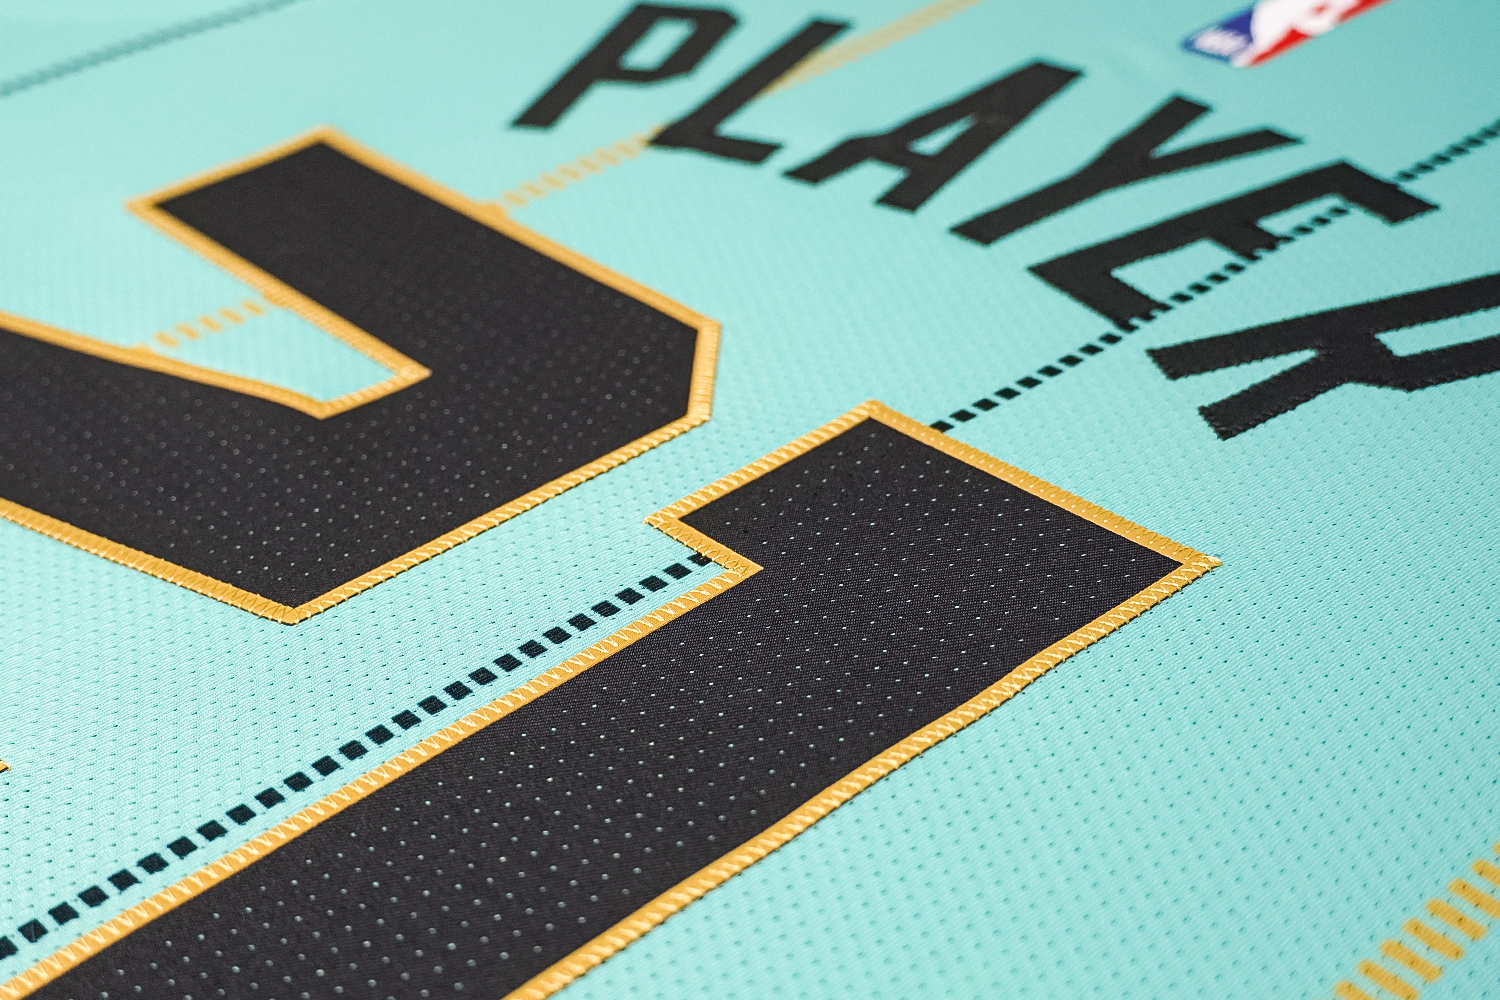 Charlotte Hornets: Buzz City Minted